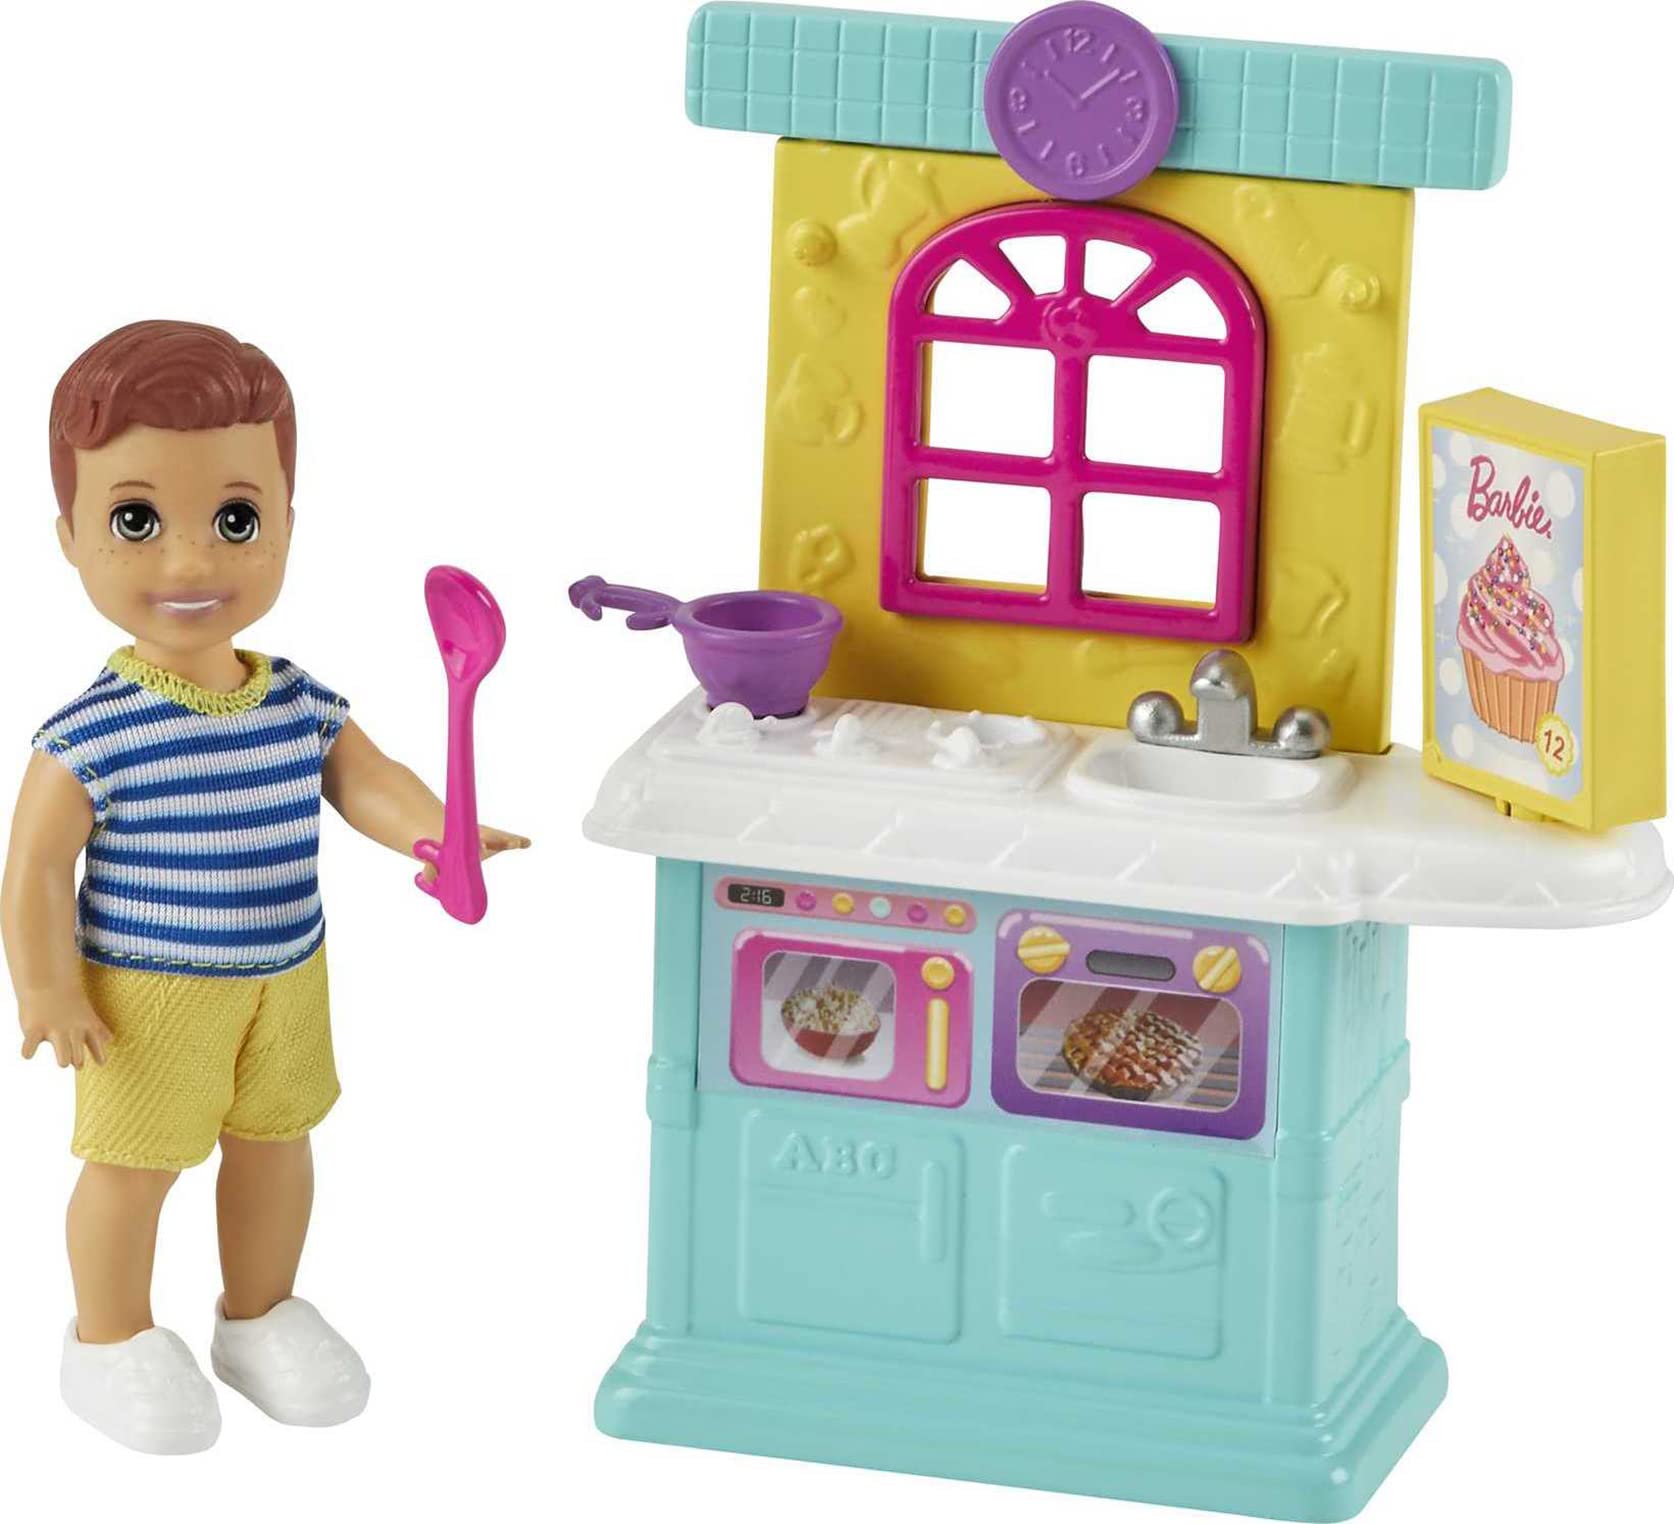 Barbie Skipper Babysitters Inc. Accessories Set with Small Toddler Doll & Kitchen Playset, Plus Dessert Mix Box, Bowl & Spoon, Gift for 3 to 7 Year Olds , White